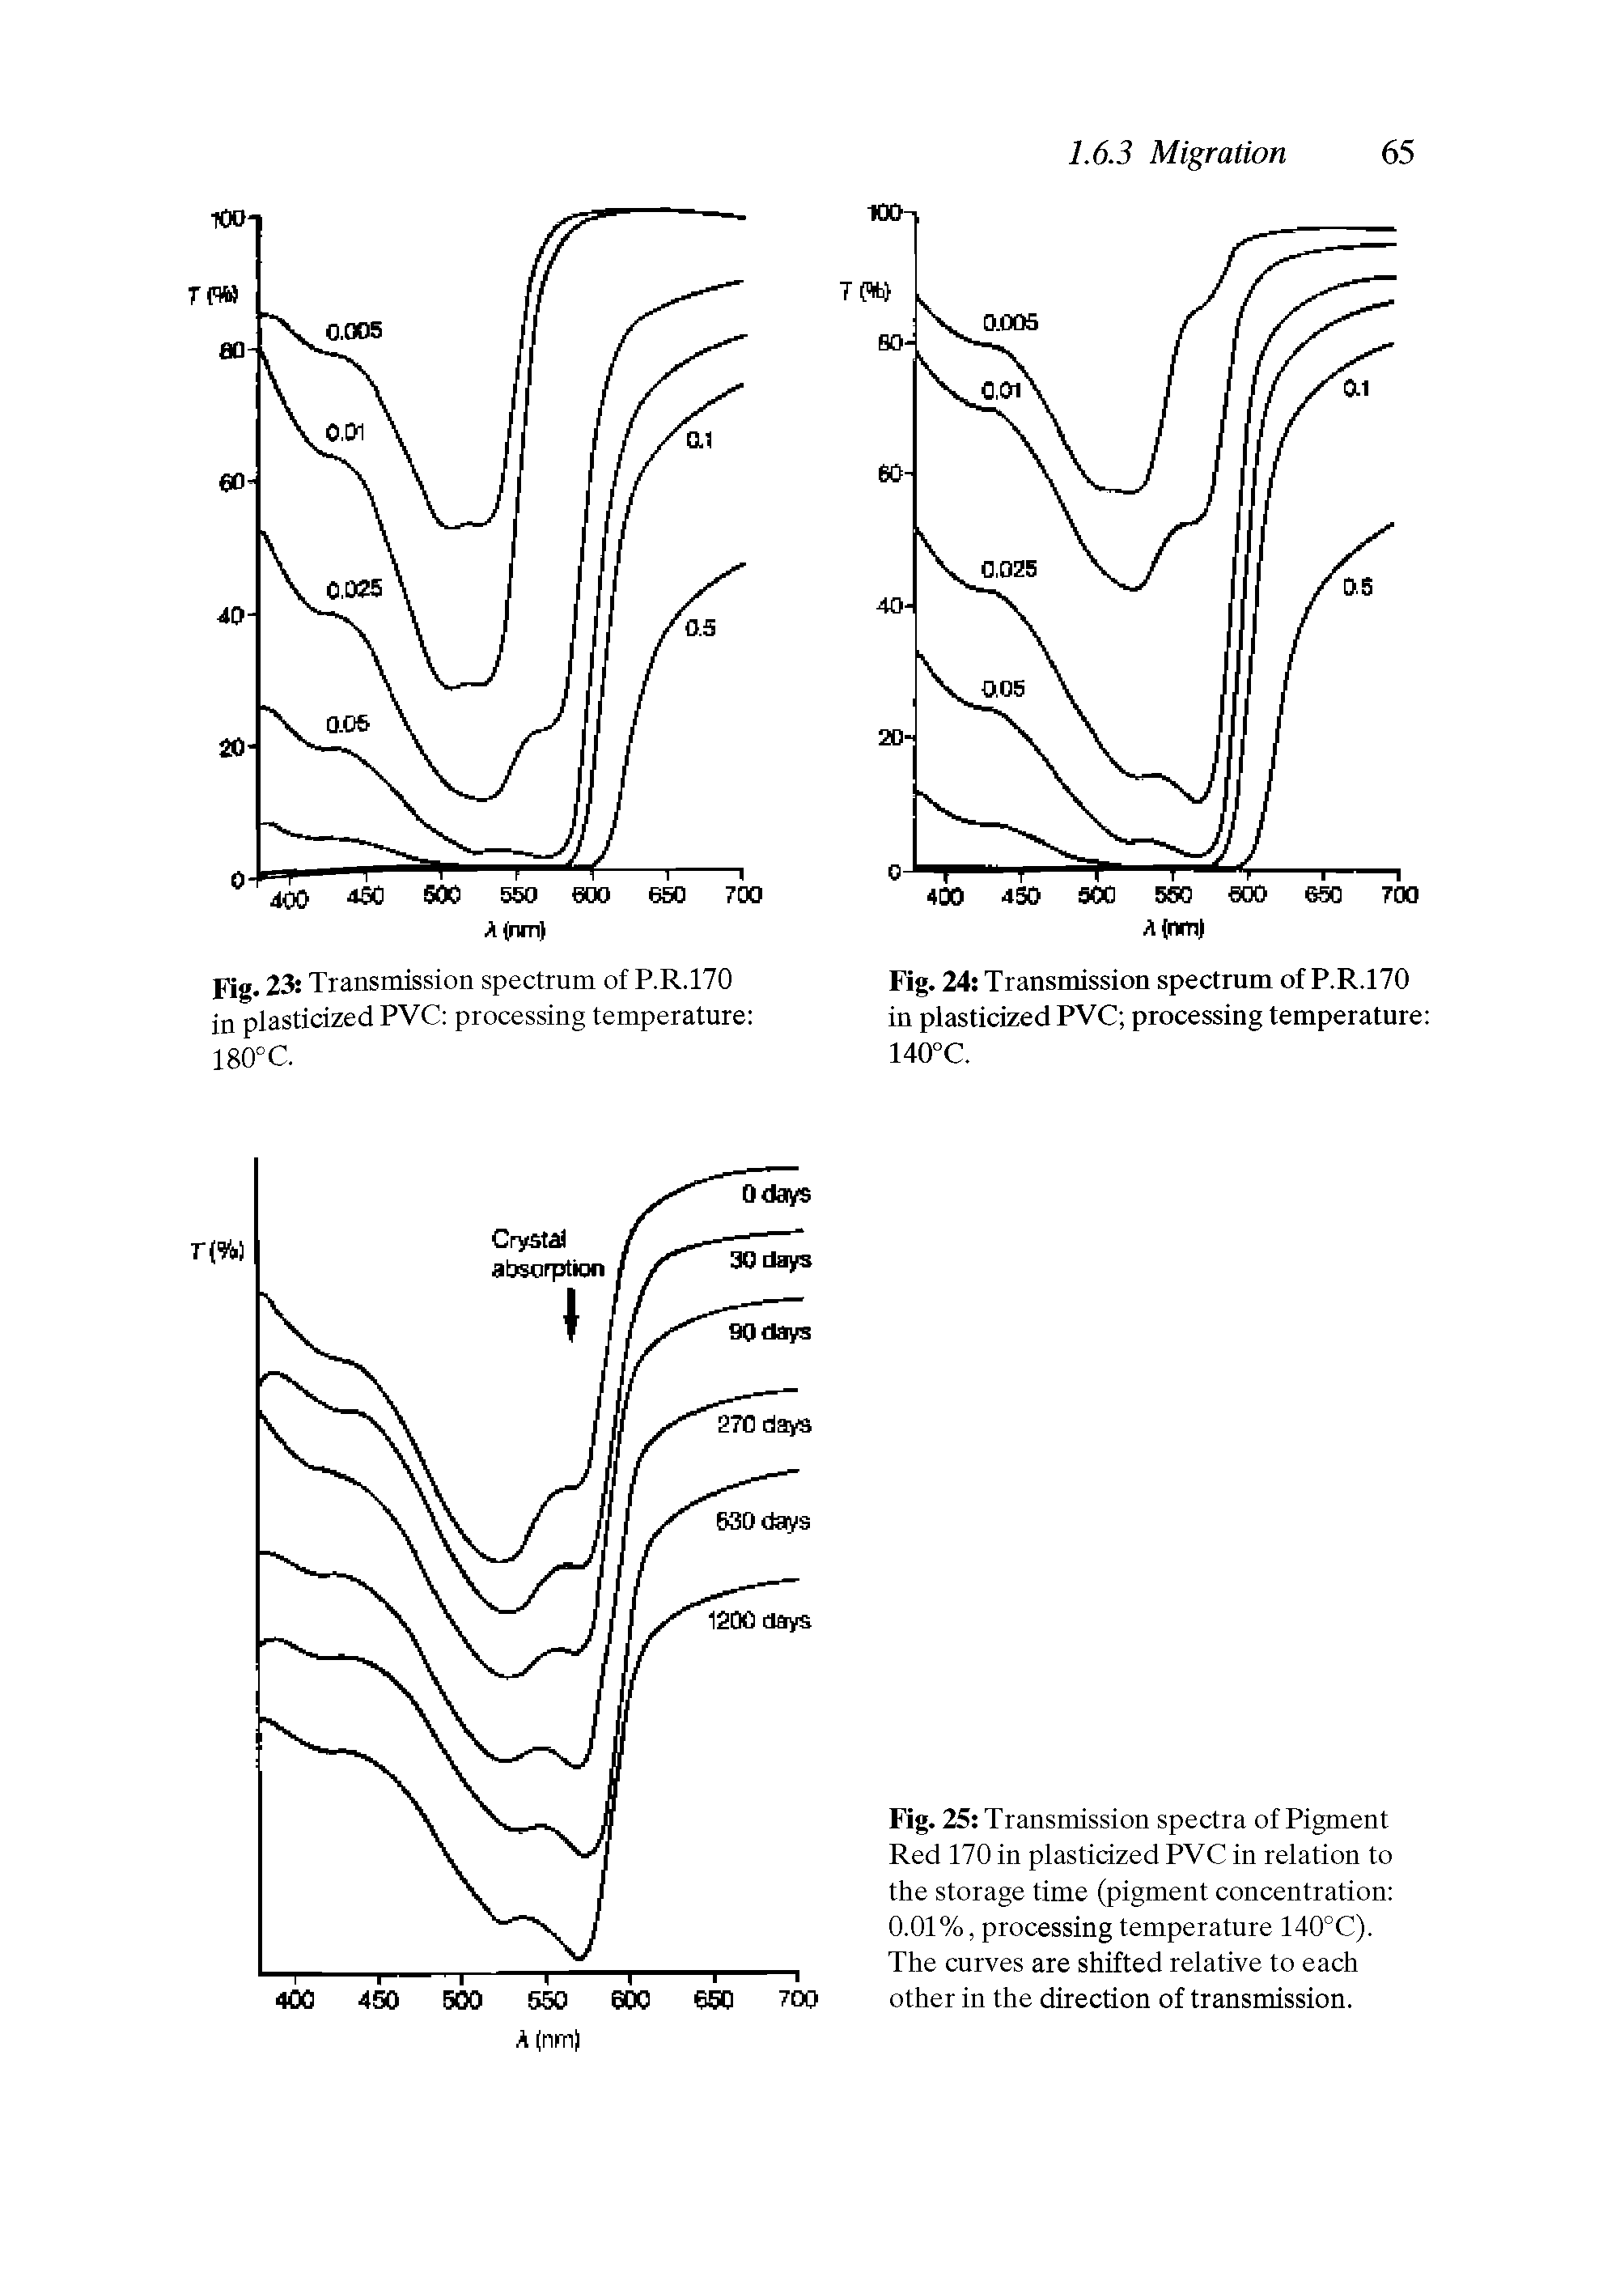 Fig. 25 Transmission spectra of Pigment Red 170 in plasticized PVC in relation to the storage time (pigment concentration 0.01%, processing temperature 140°C). The curves are shifted relative to each other in the direction of transmission.